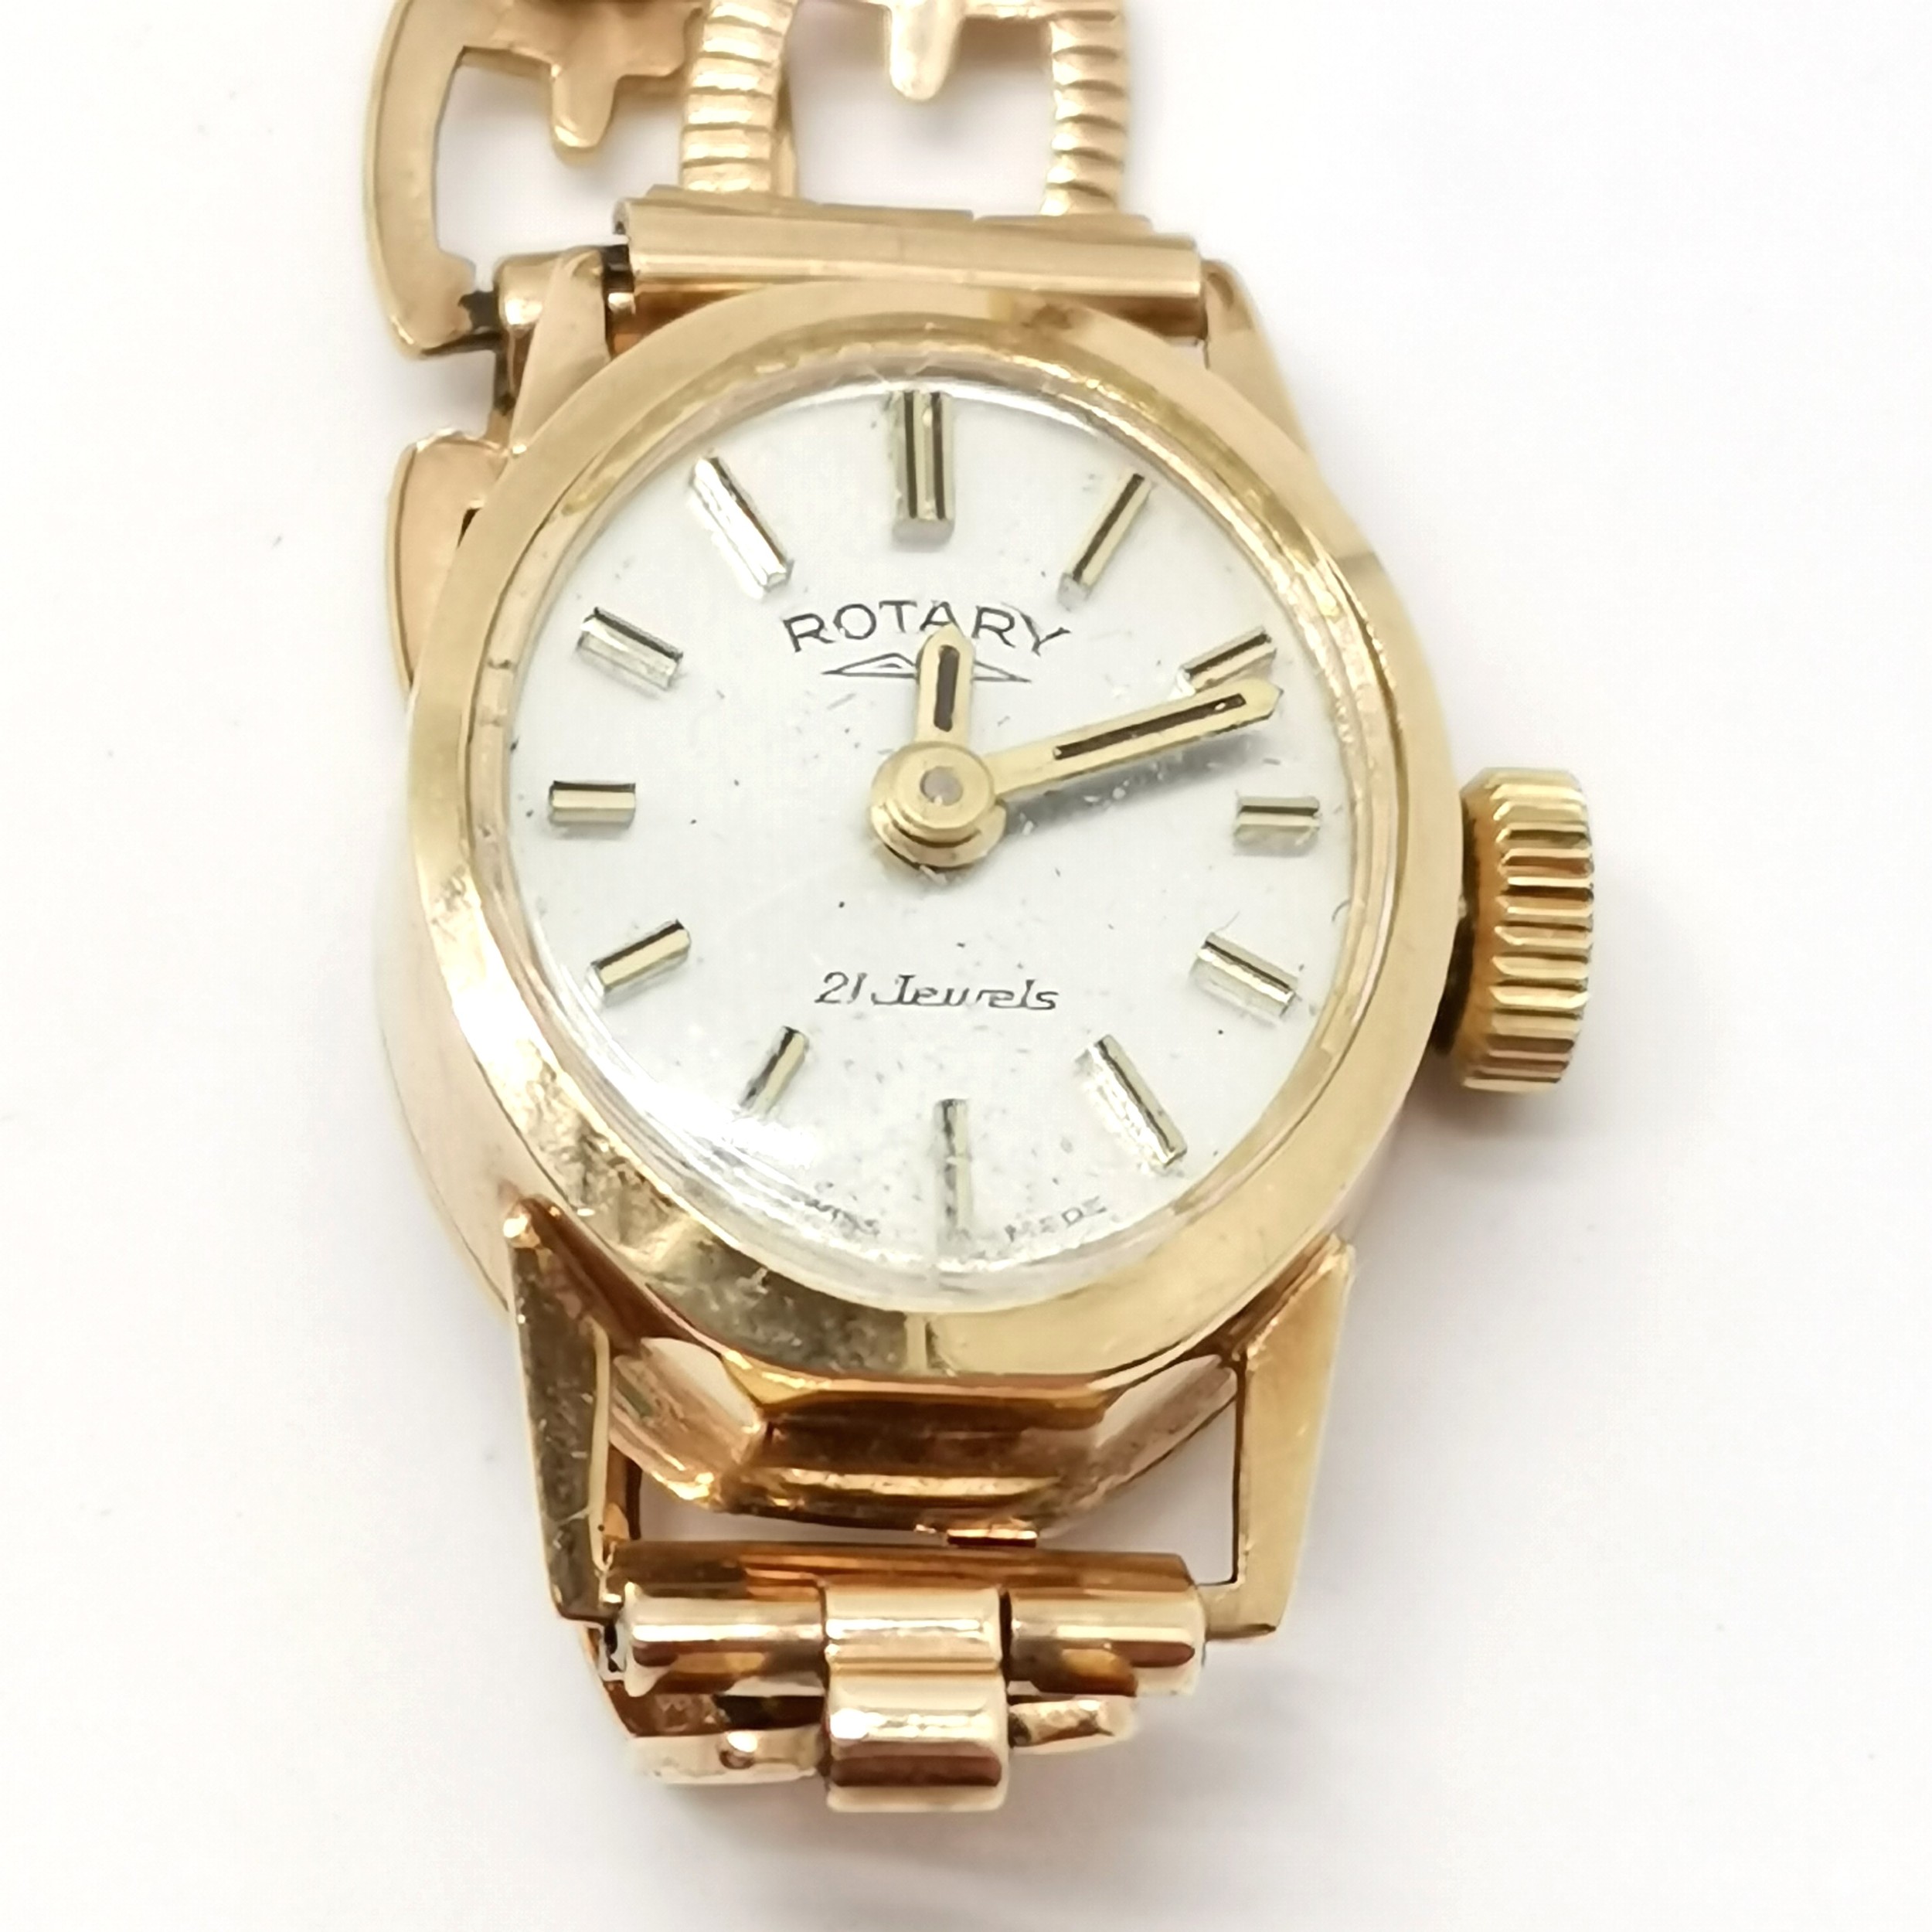 Rotary 9ct hallmarked gold ladies manual wind wristwatch with 9ct marked gold bracelet - 10.9g total - Image 2 of 3